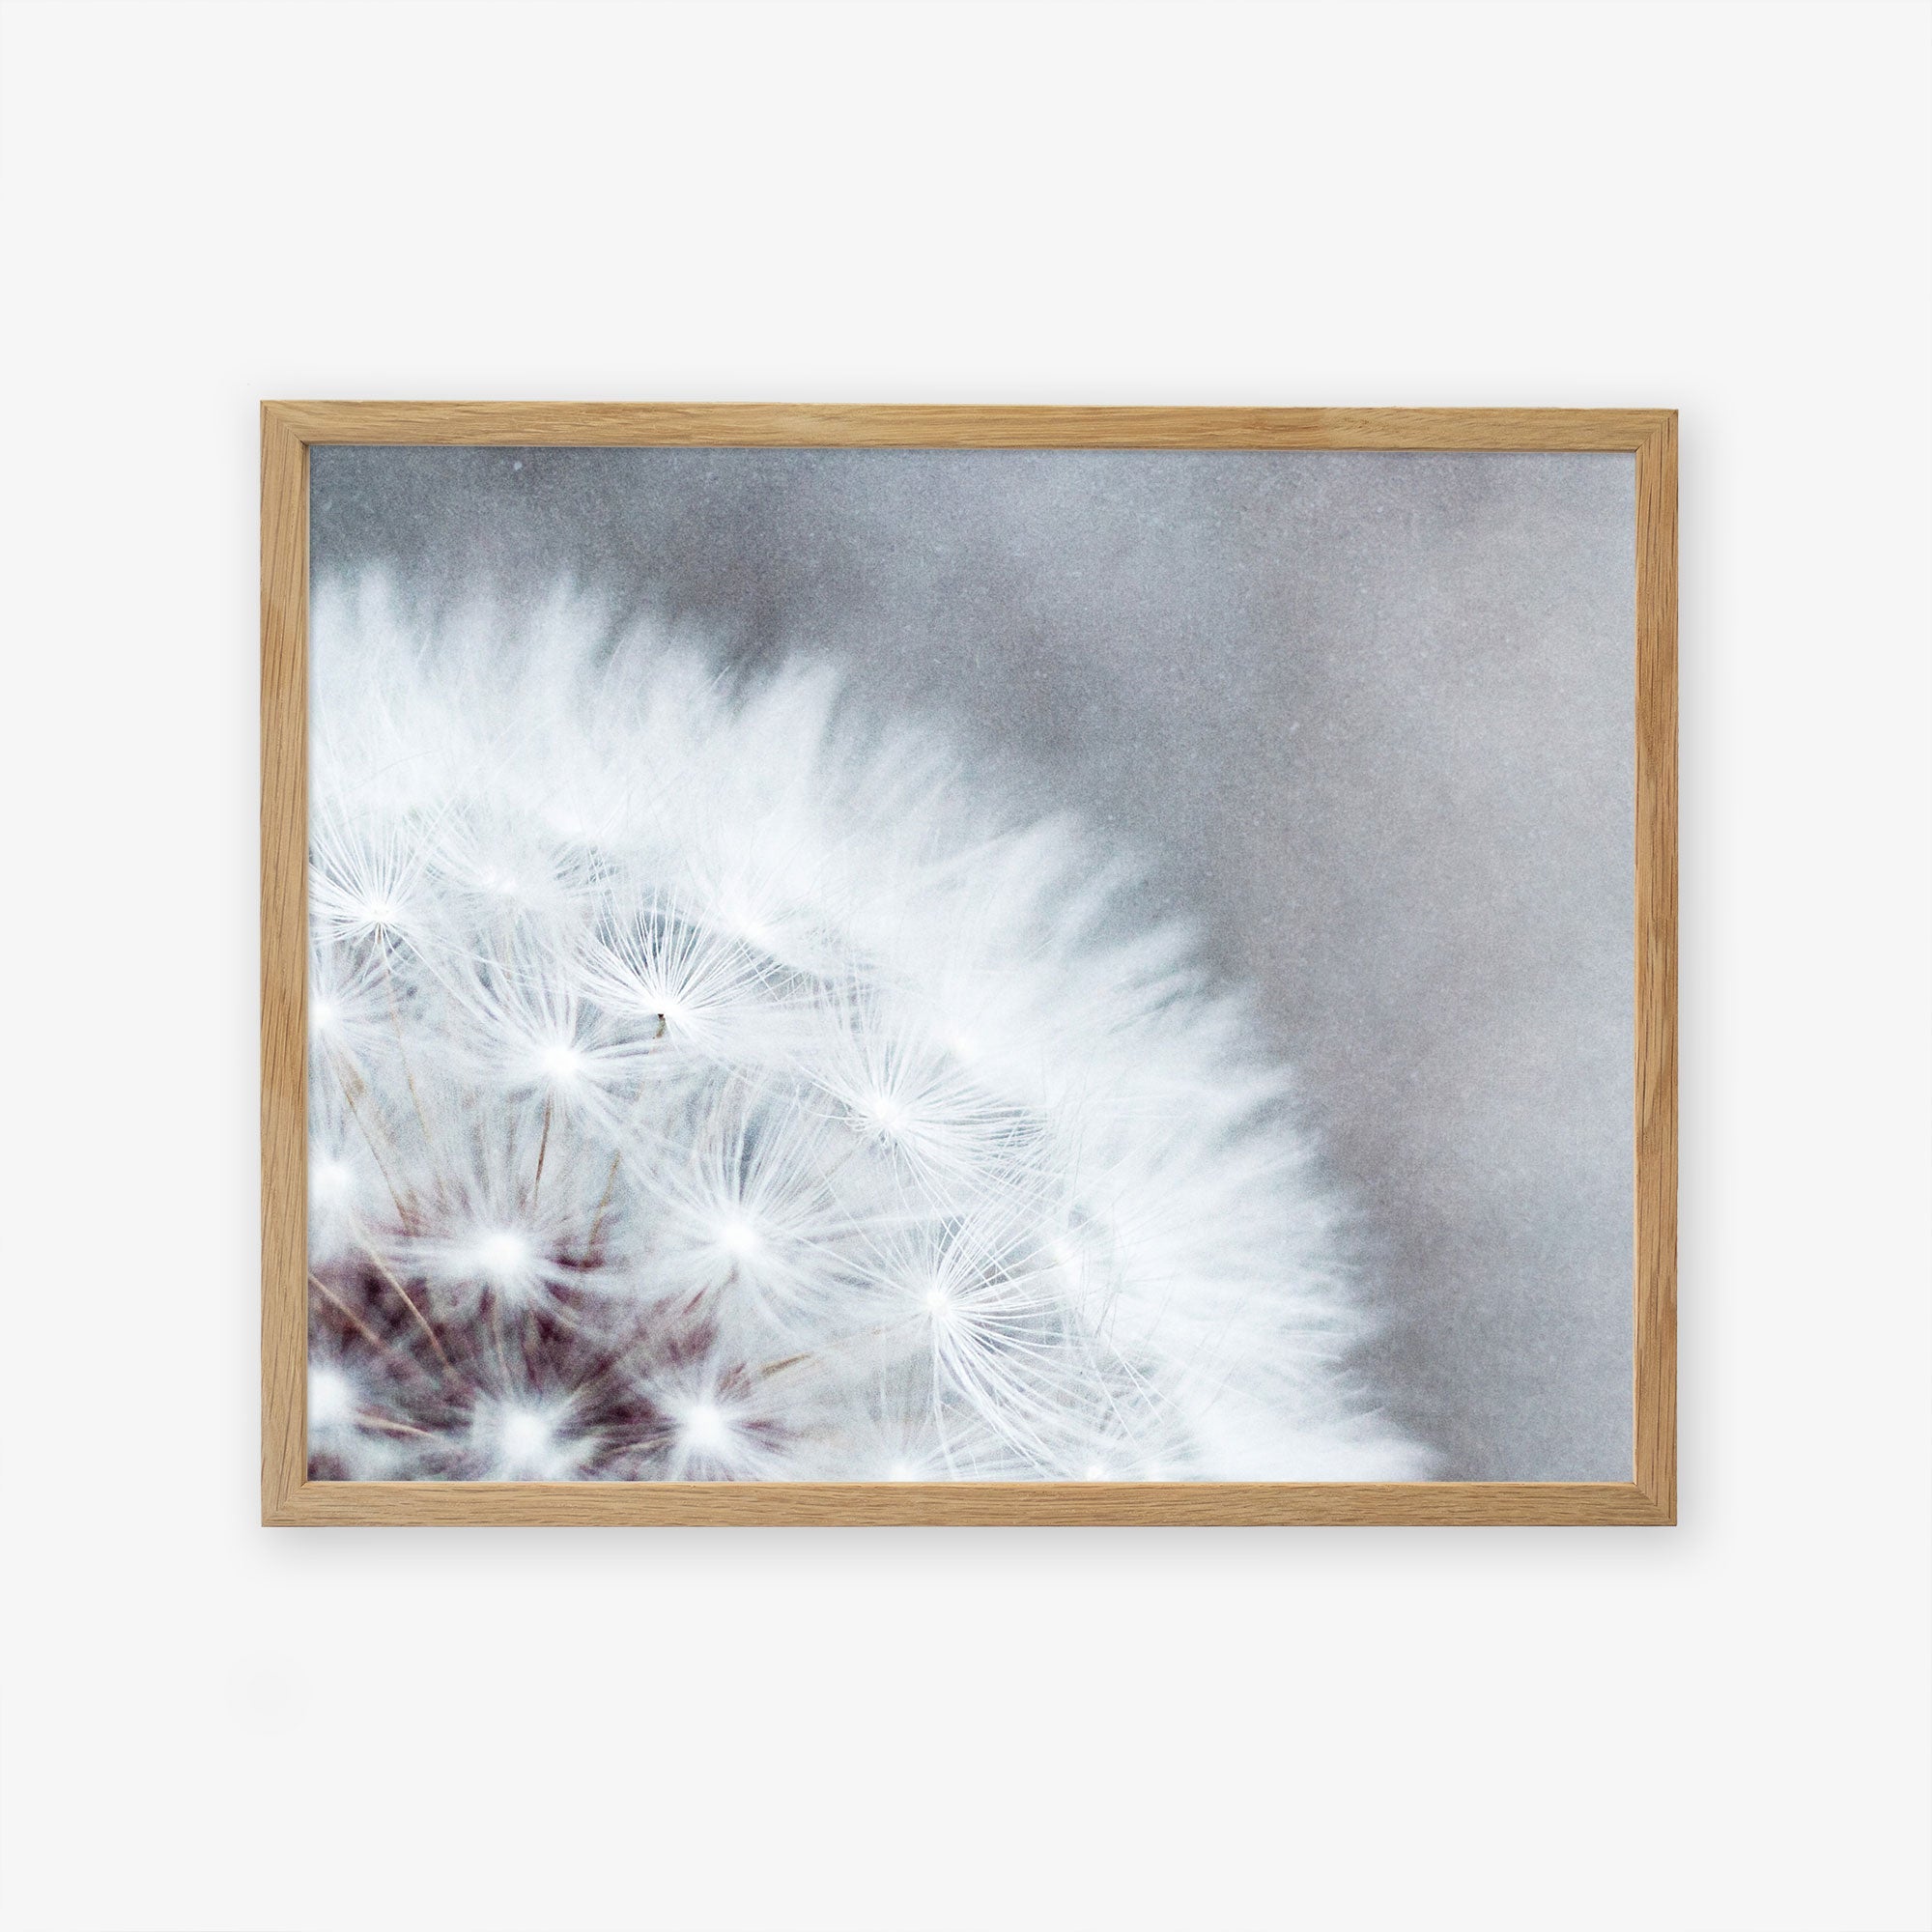 A close-up image of a Grey Botanical Print, &#39;Dandelion Queen&#39; displayed in a wooden frame on plain white archival photographic paper by Offley Green, showcasing fine details and textures of the seeds.